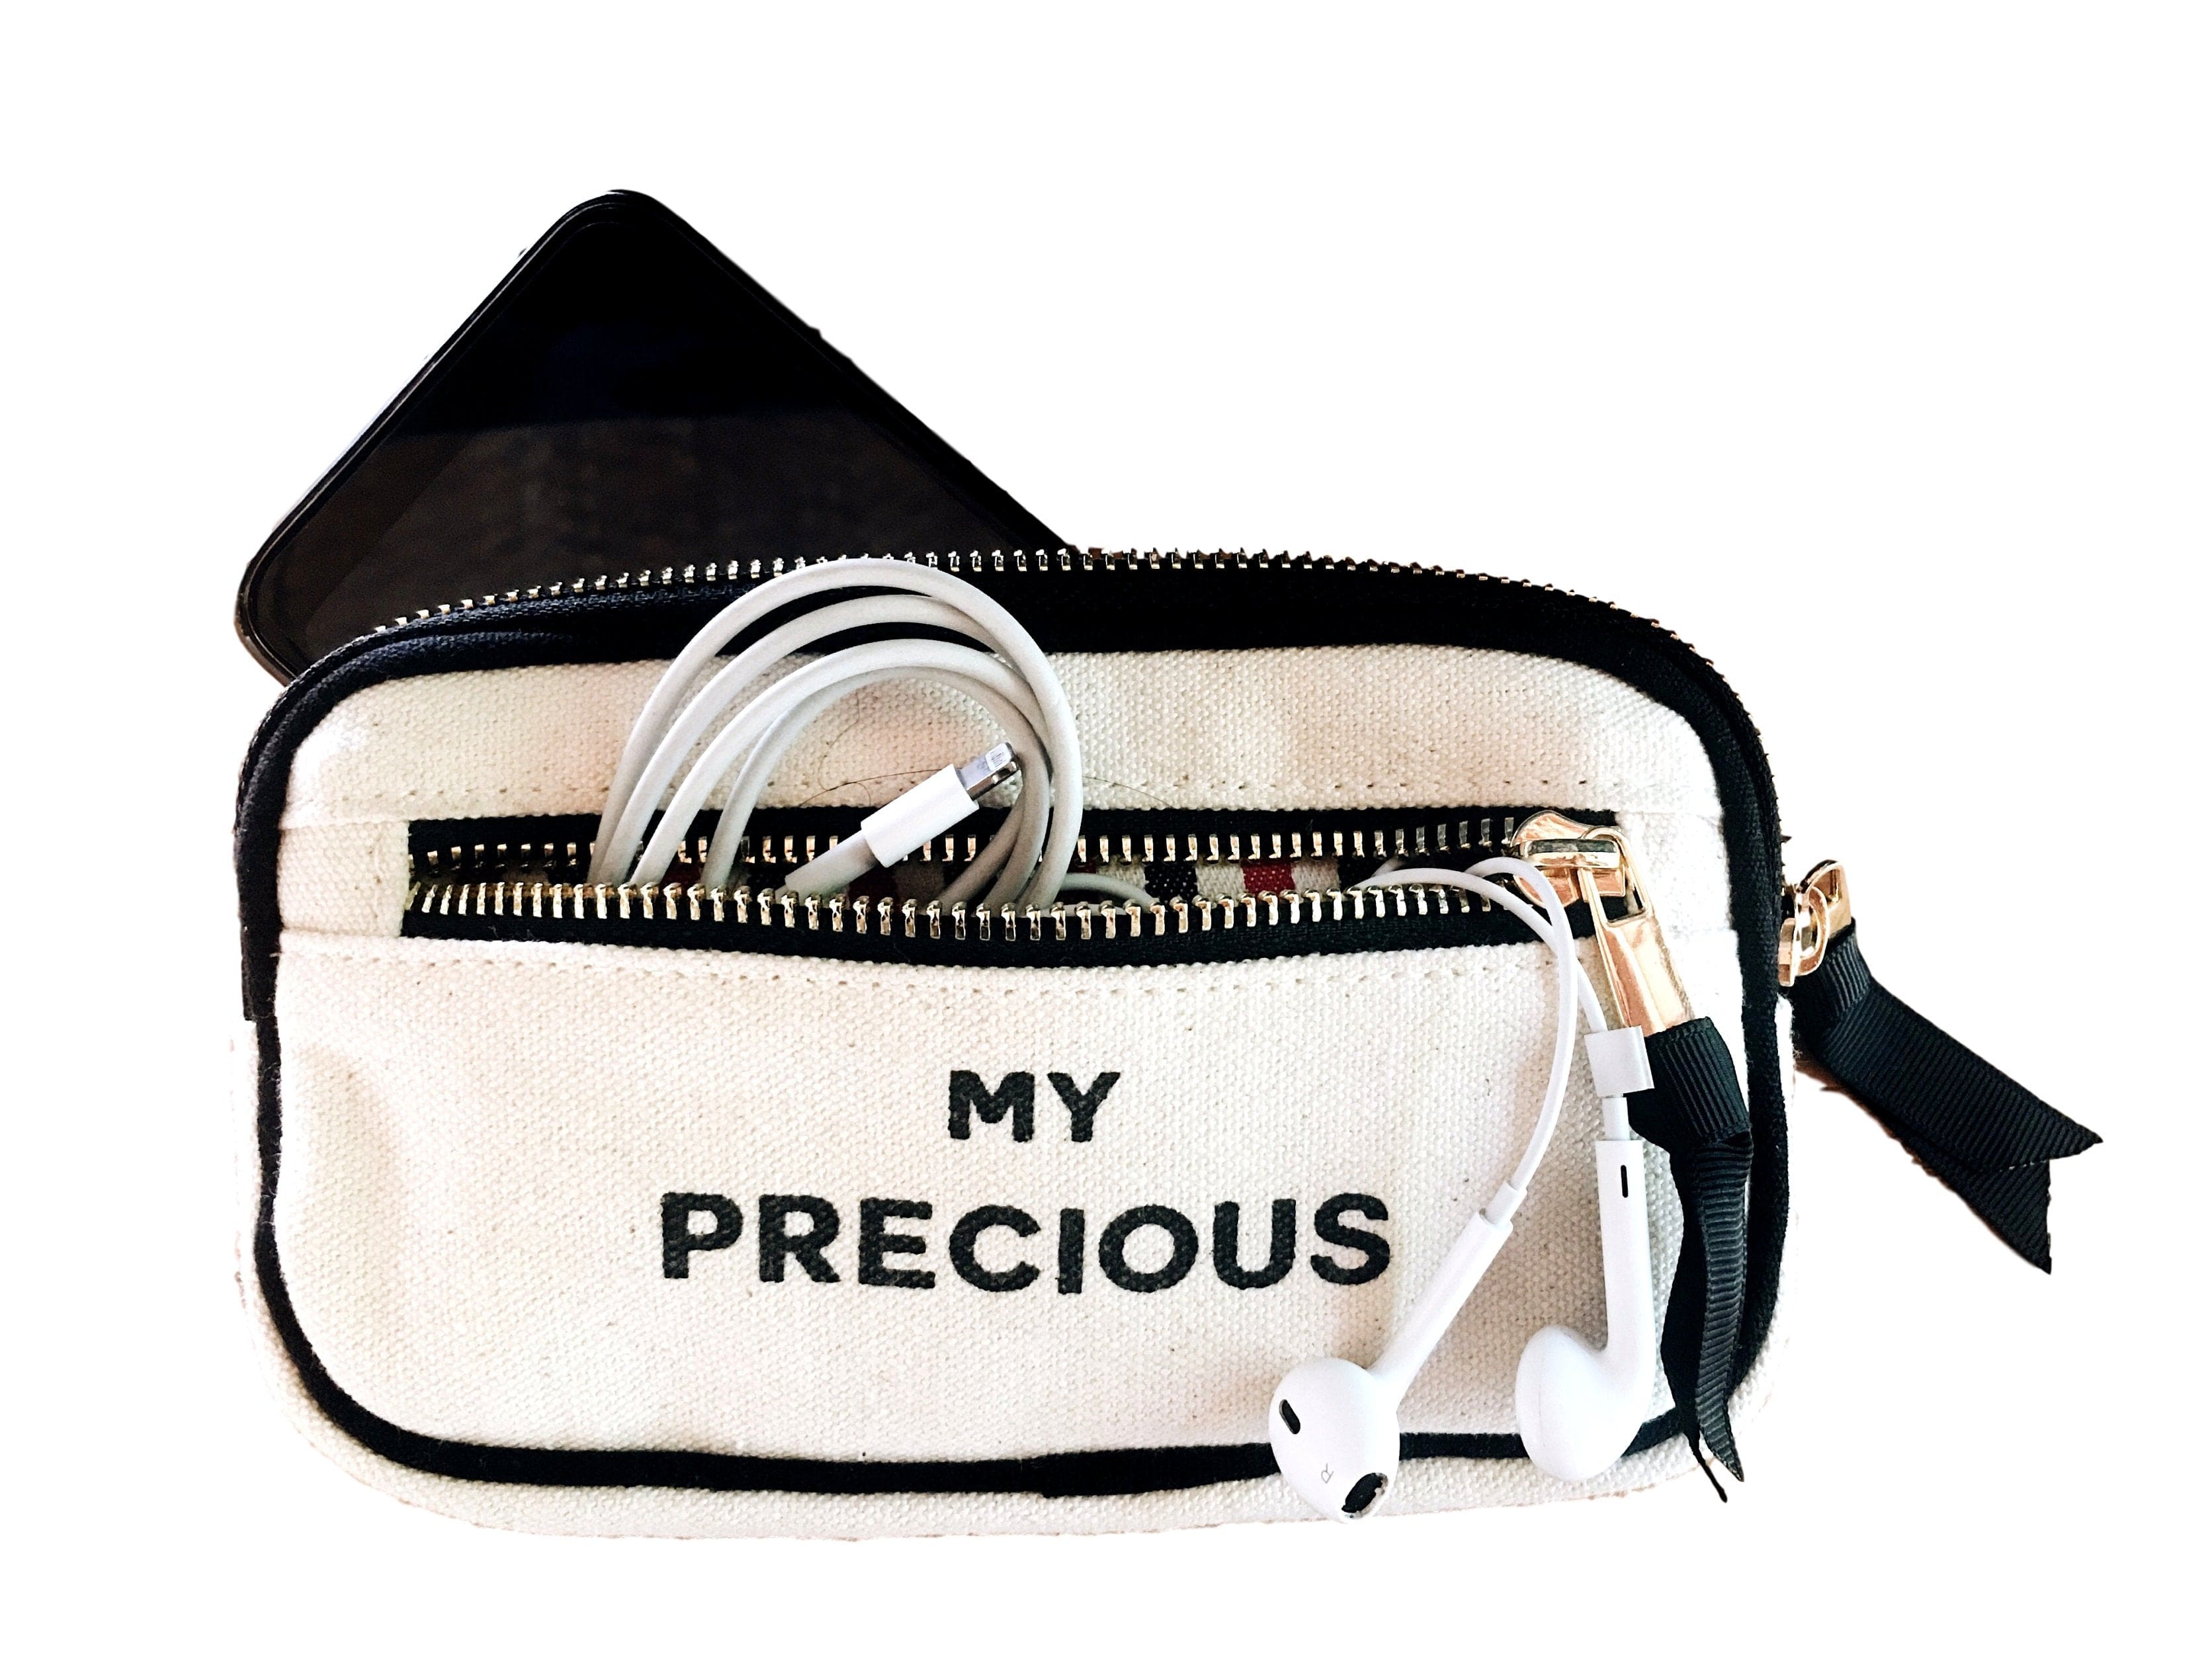 Caprice Bag Organizer in white with "my precious" across the front. 